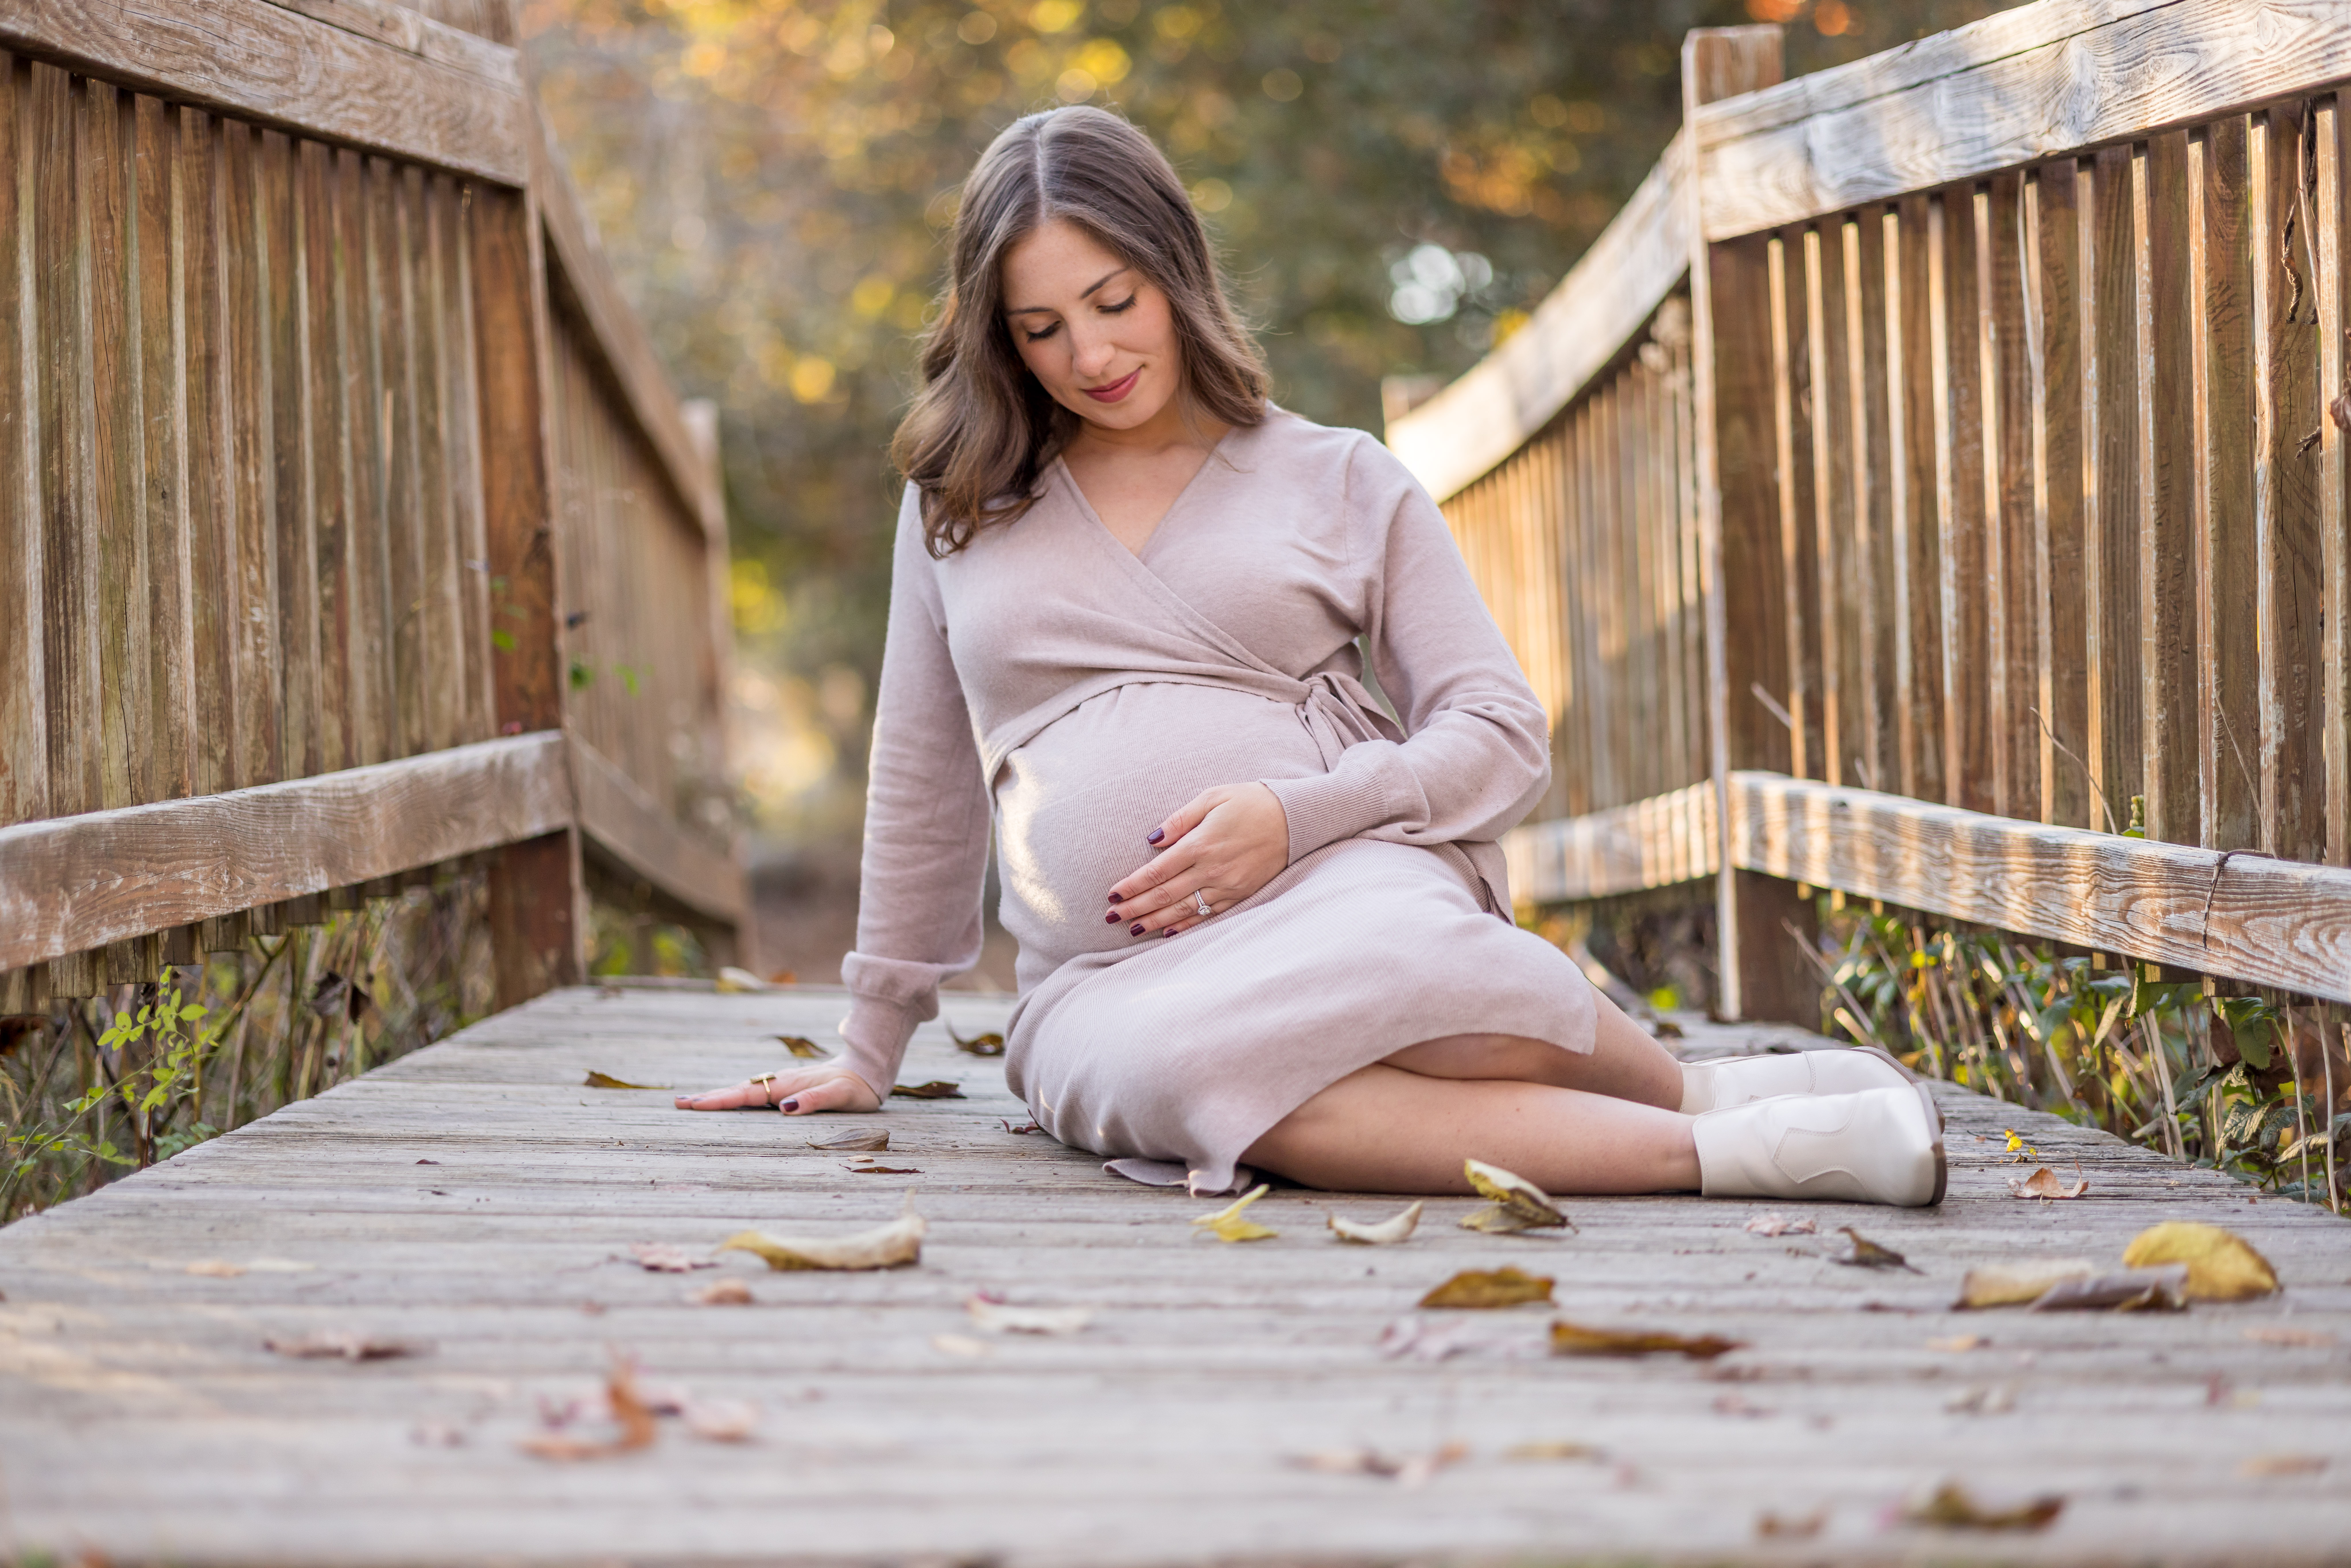 maternity photo session in acton ma with couple at golden hour by allie.photo